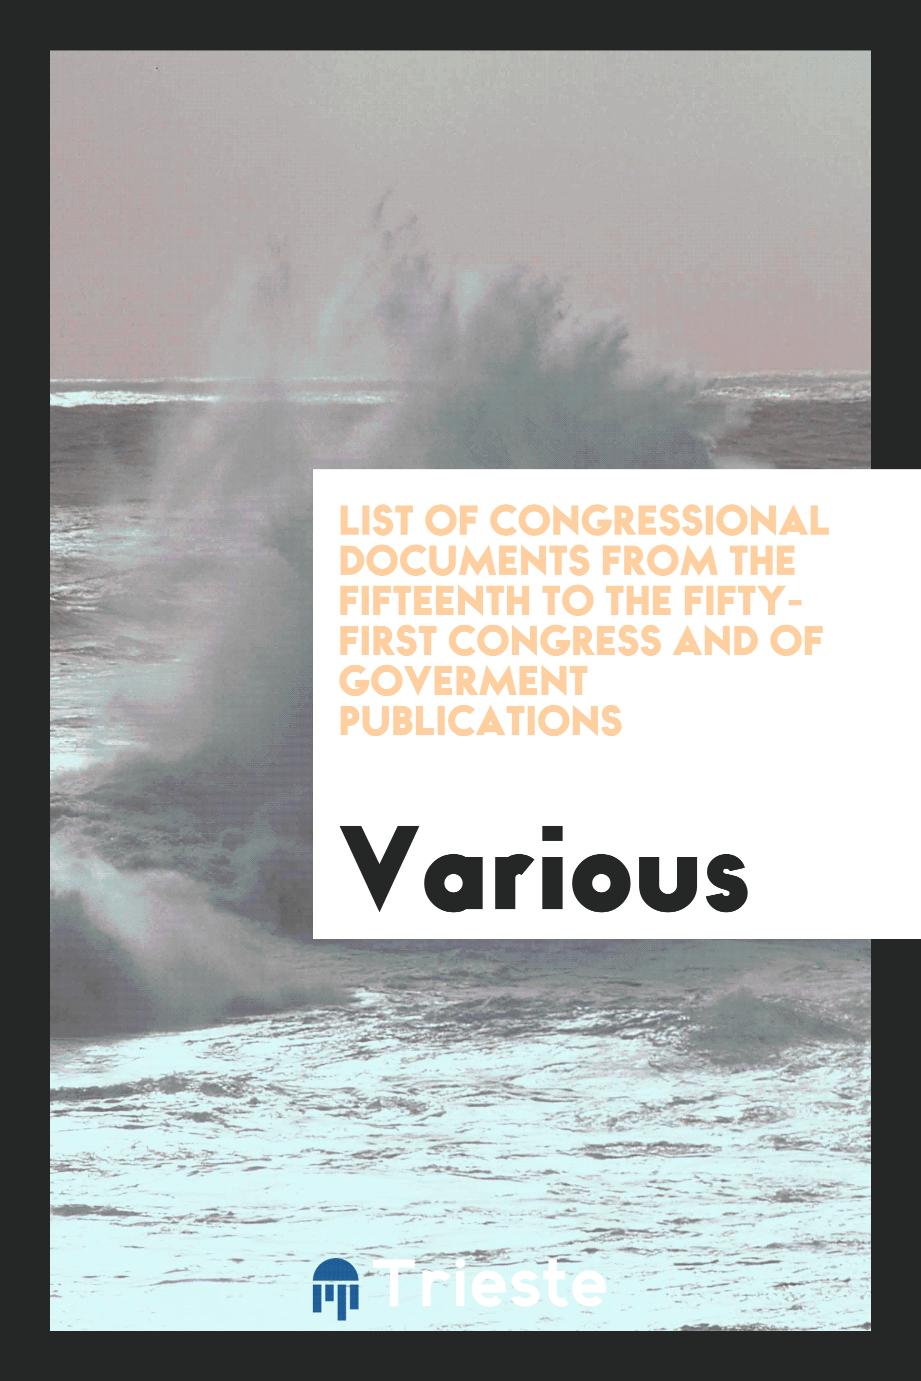 List of Congressional Documents from the Fifteenth to the Fifty-first Congress and of Goverment Publications